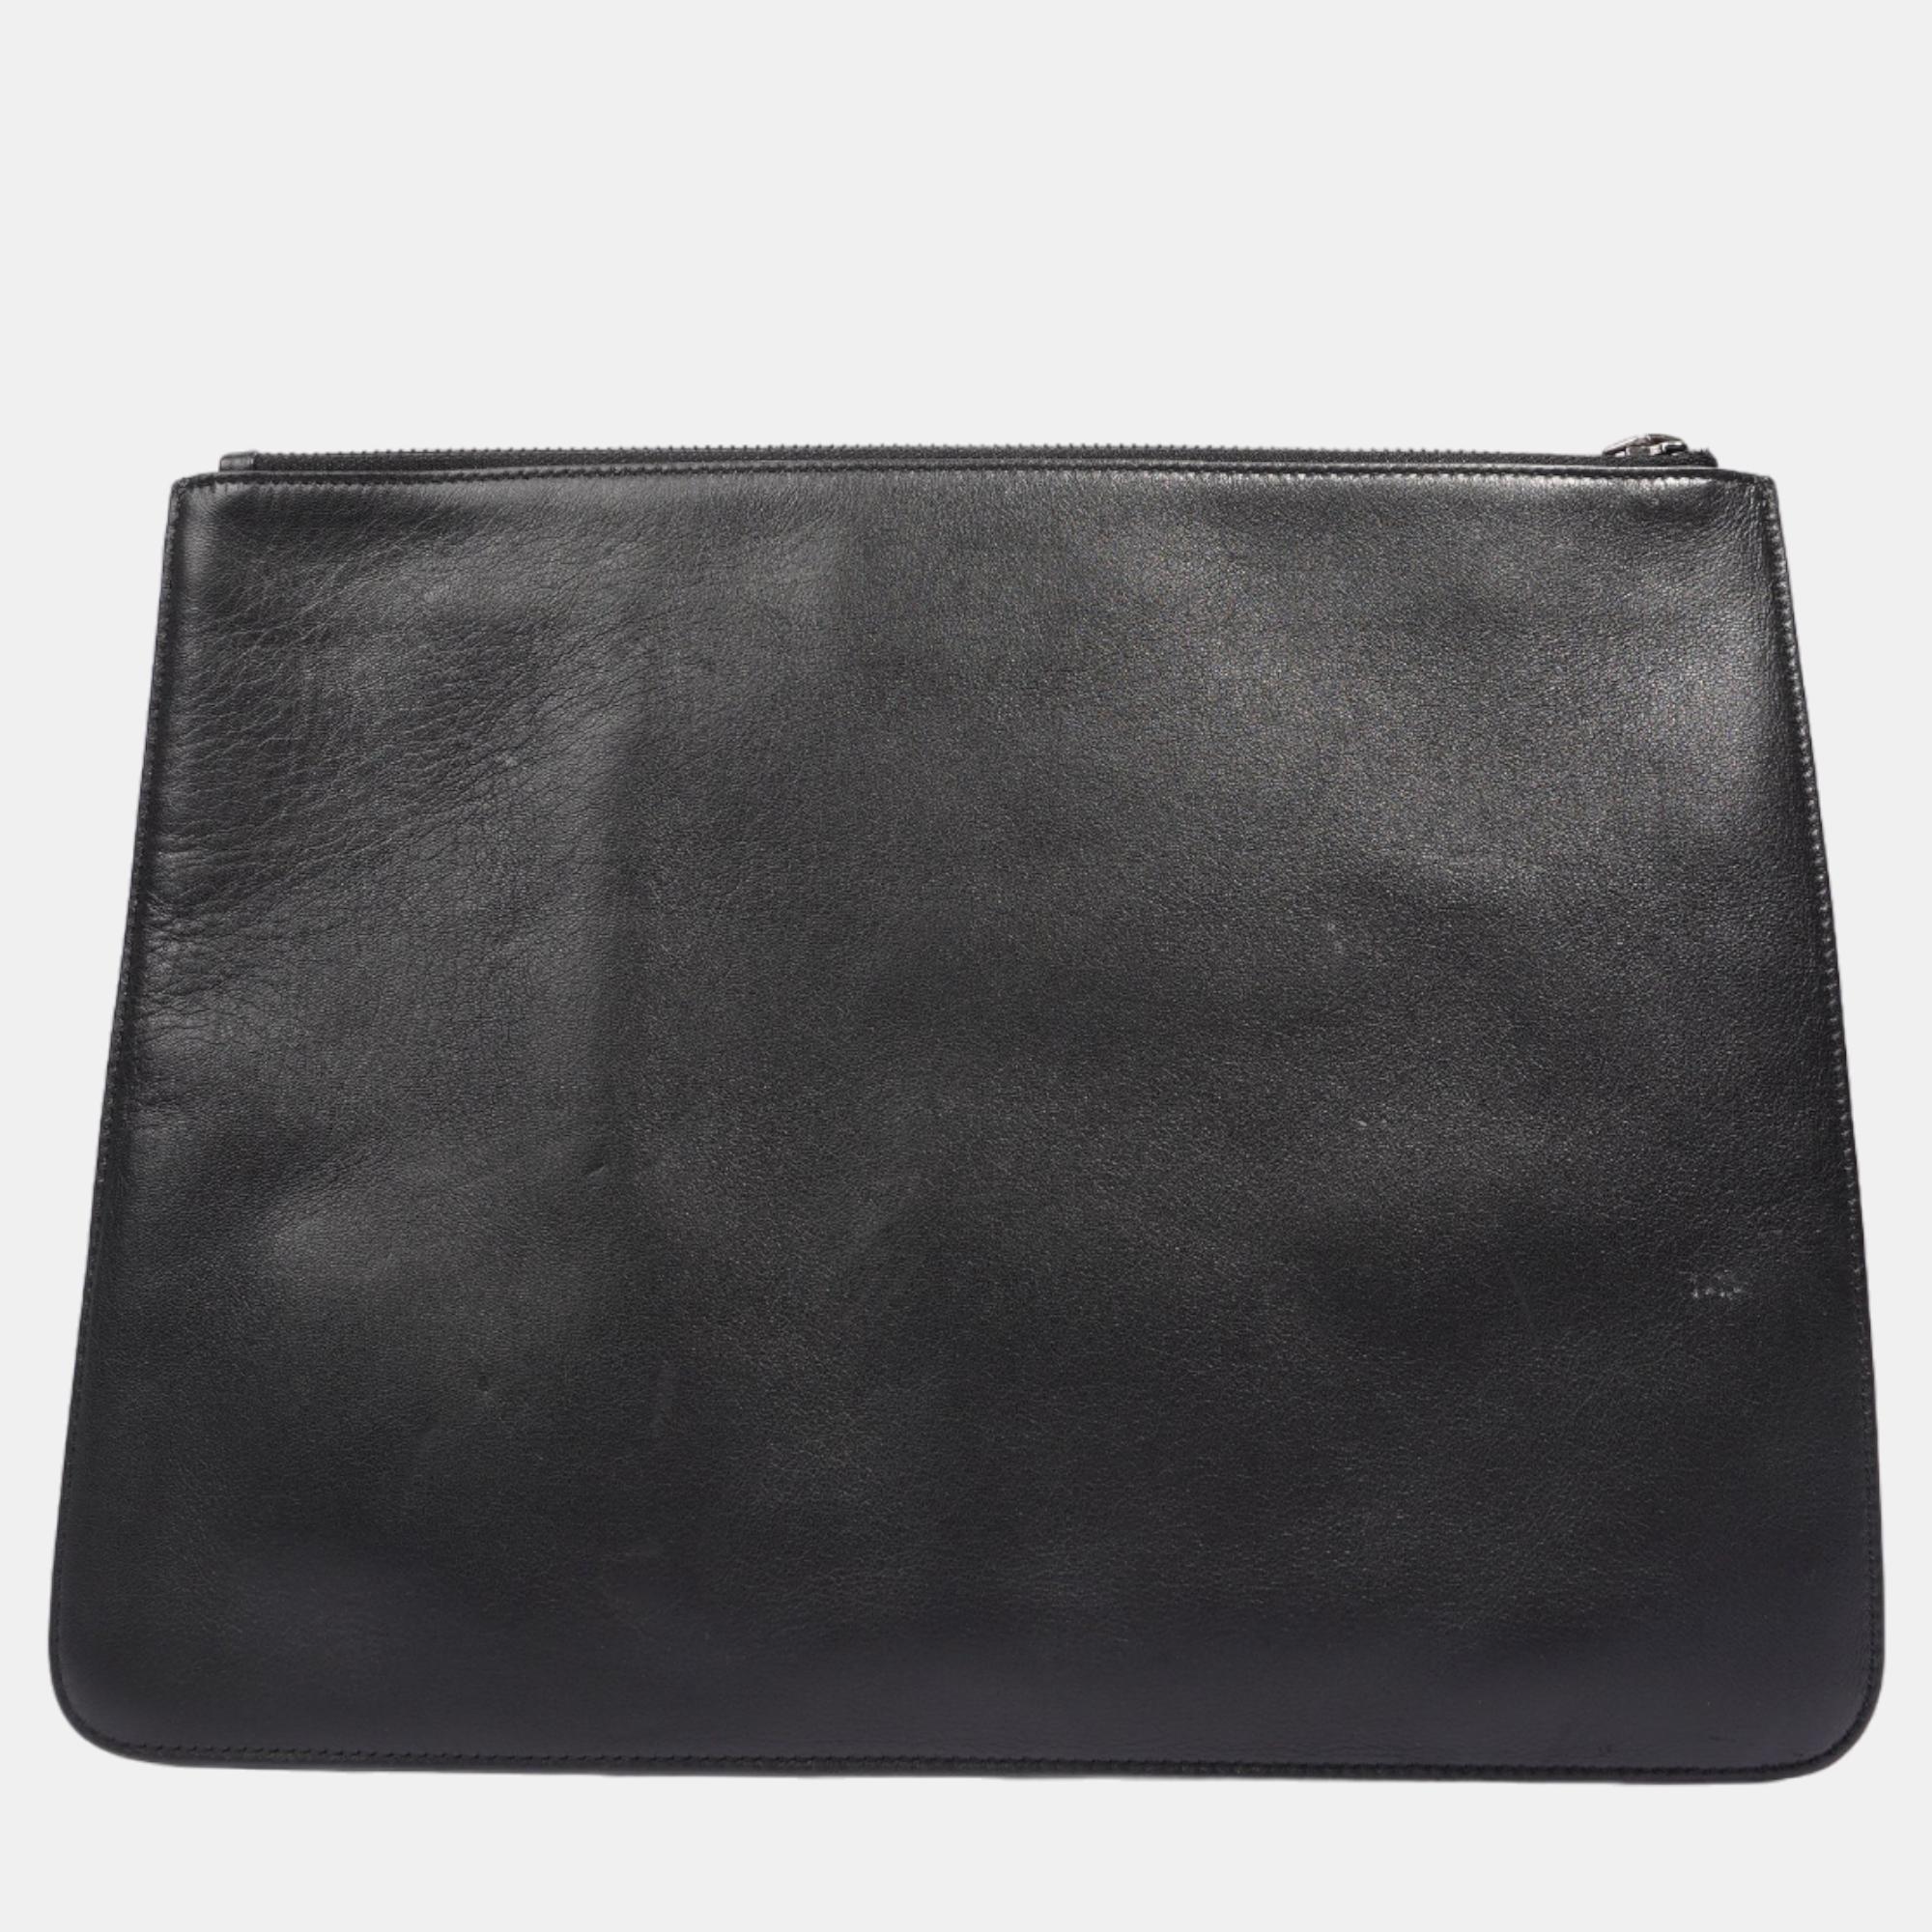 Givenchy Star Clutch Black Leather